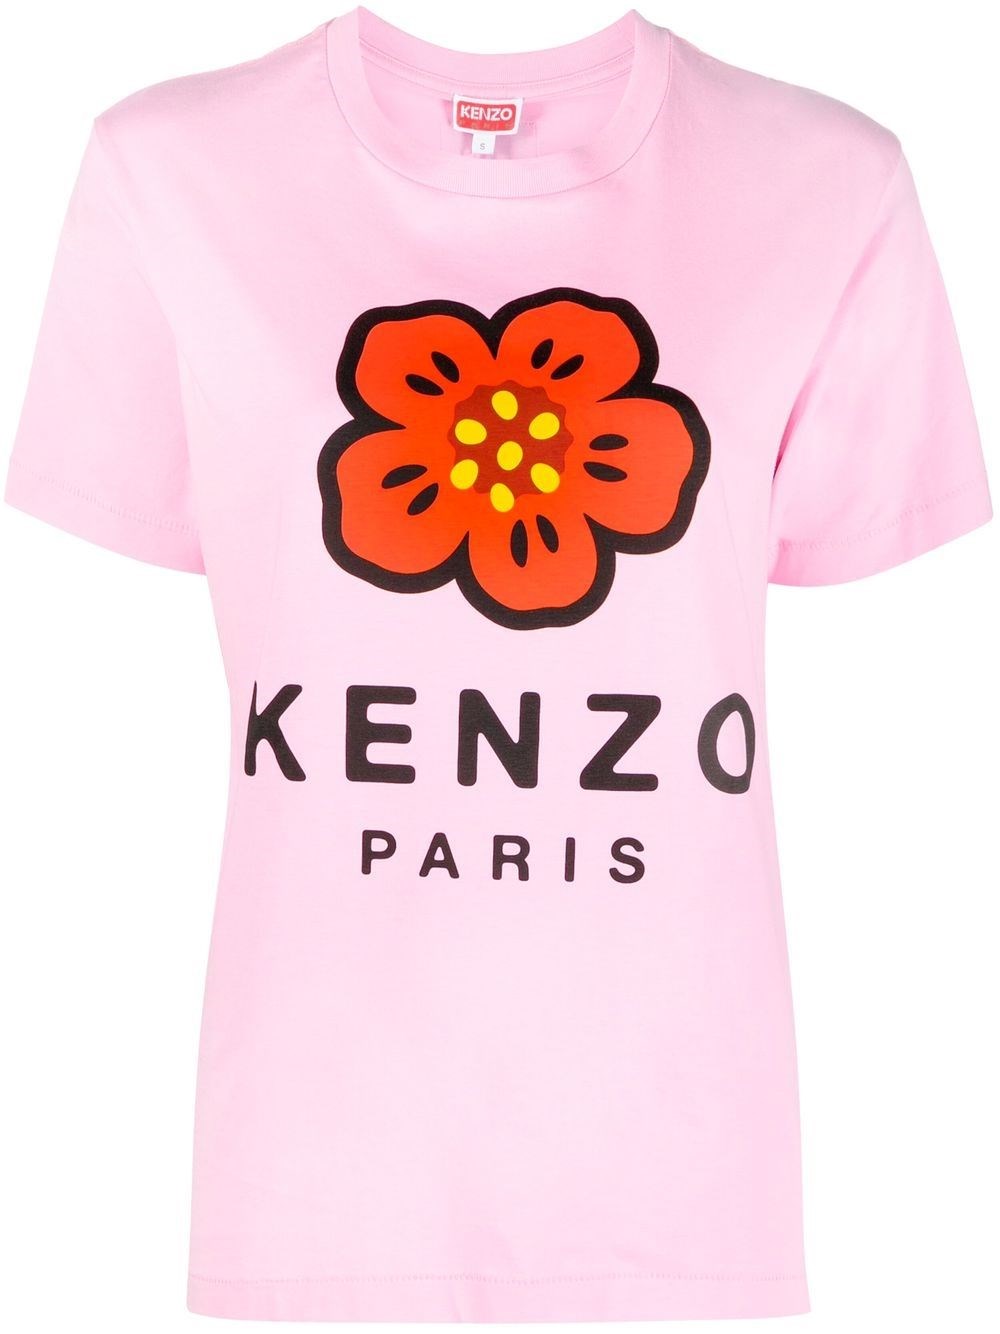 kenzo T-SHIRT BOKE FLOWER available on montiboutique.com - 48001